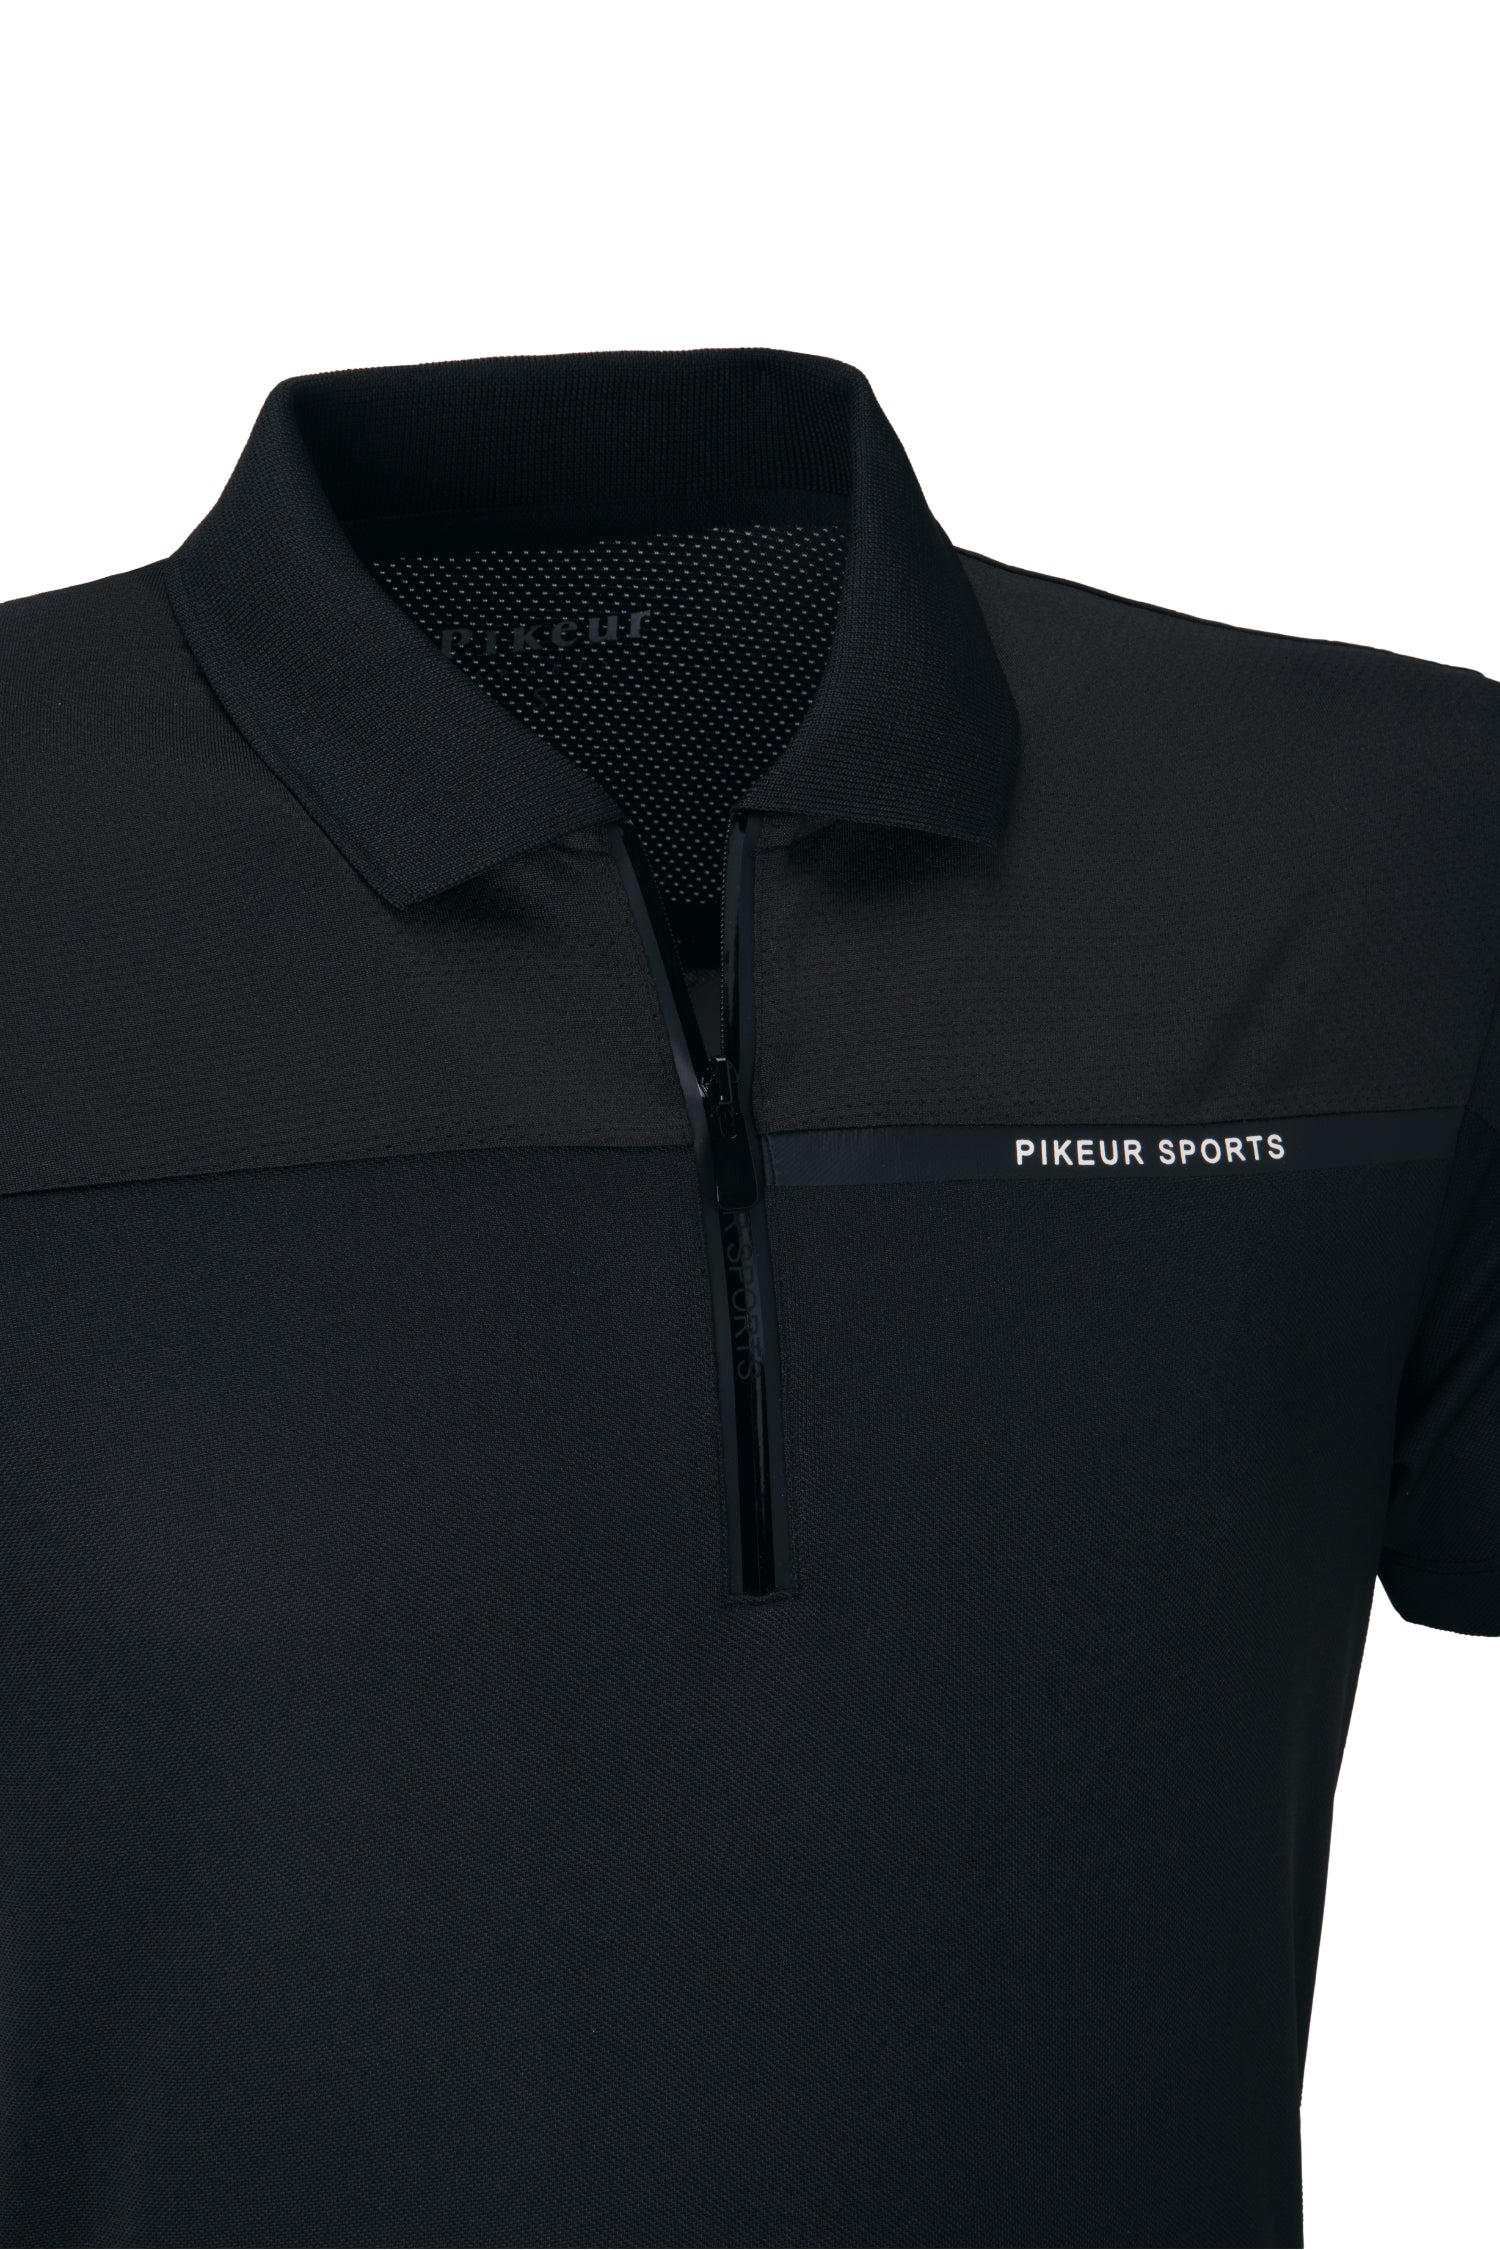 Pikeur Tiesta Mens Functional Shirt 5222  *Pre-order for March dispatch*